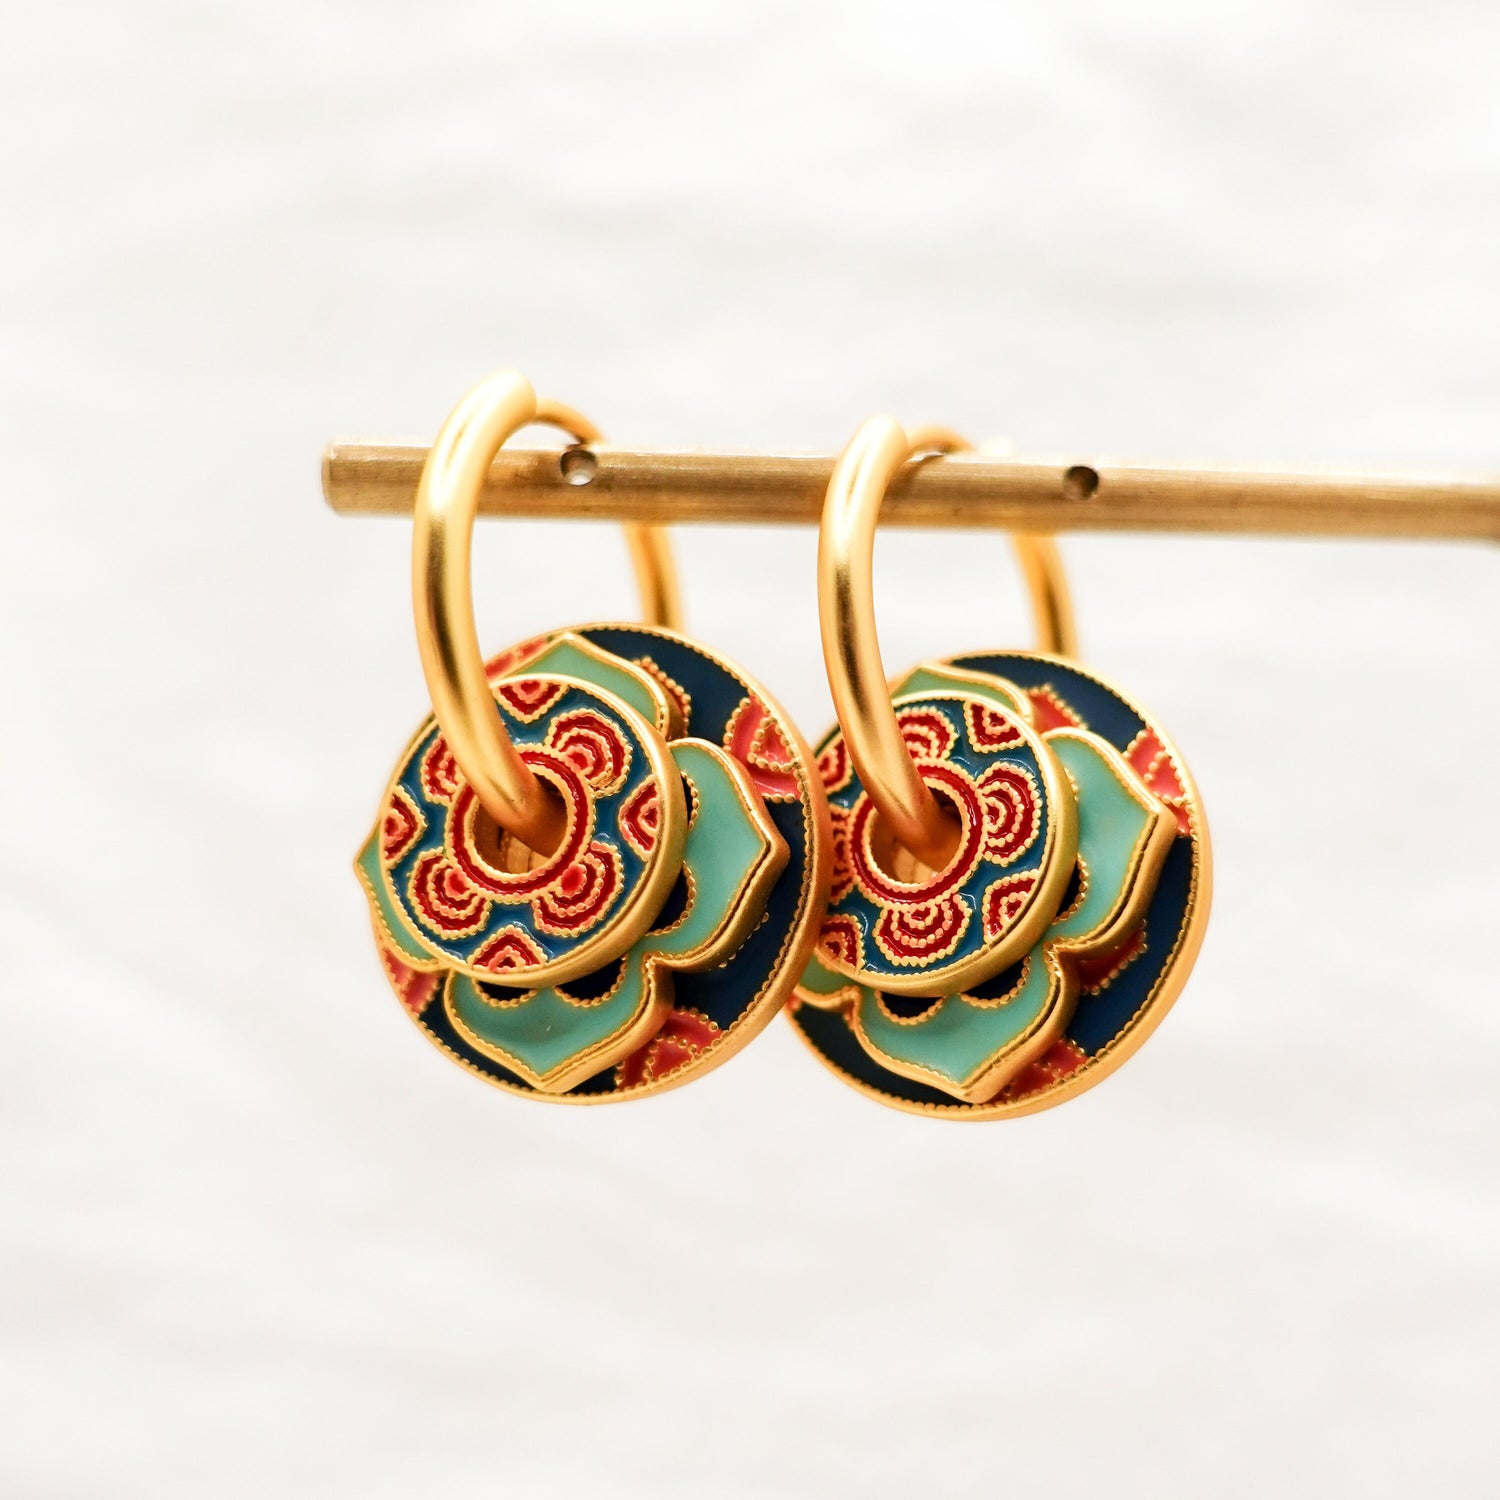 Unique 4 in 1 Vibrant Stackable Vintage Style Earrings, Elegant Gold Hoop Earrings, Tibetan Colorful Earrings, Jewelry gift for her - TibiCollection